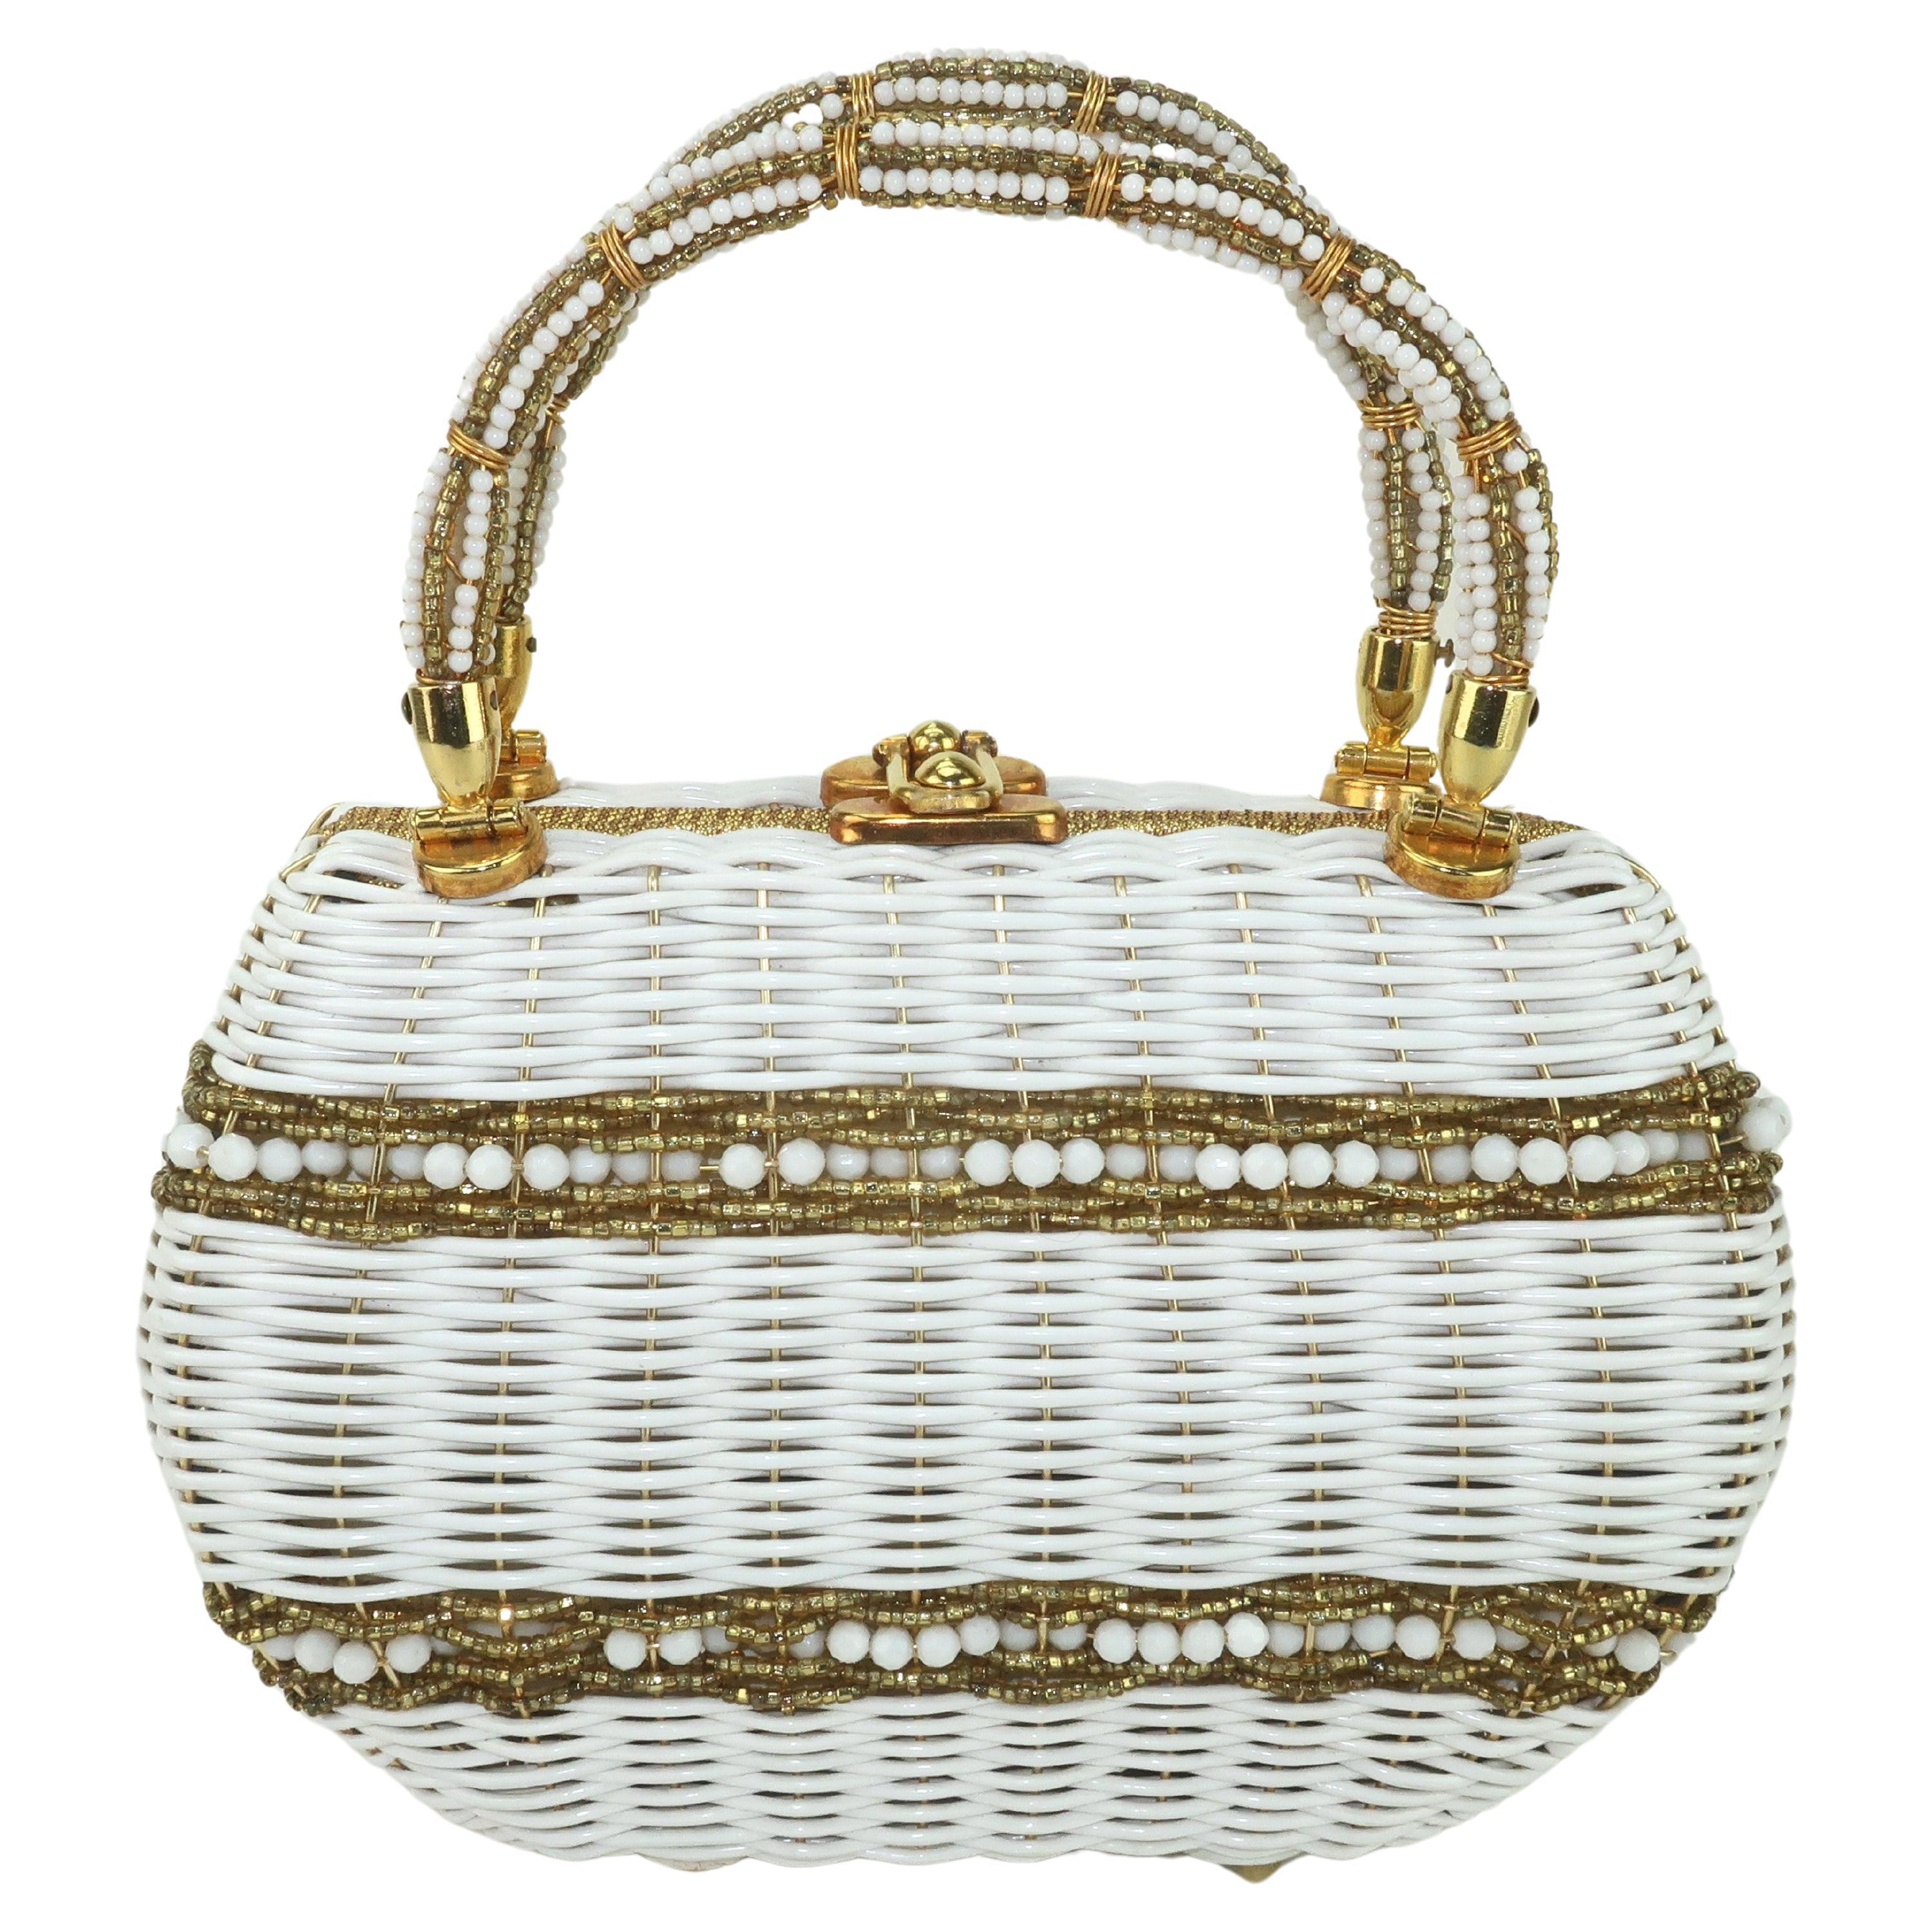 Marcus Brothers Beaded White & Gold Straw Handbag, 1950's For Sale